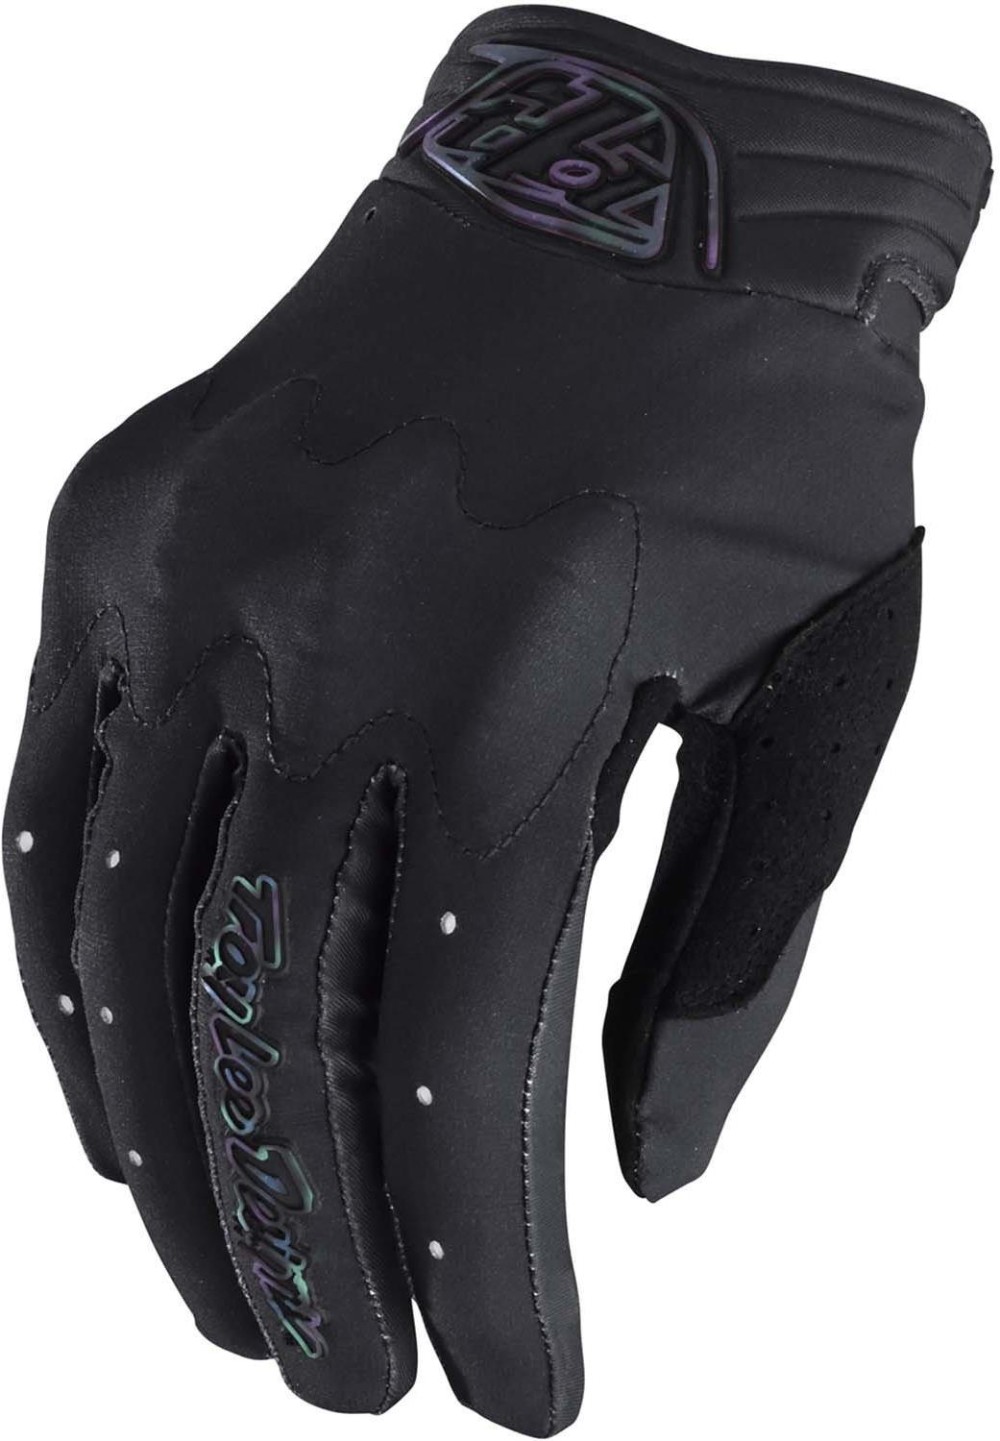 Gambit Womens Long Finger MTB Cycling Gloves image 0